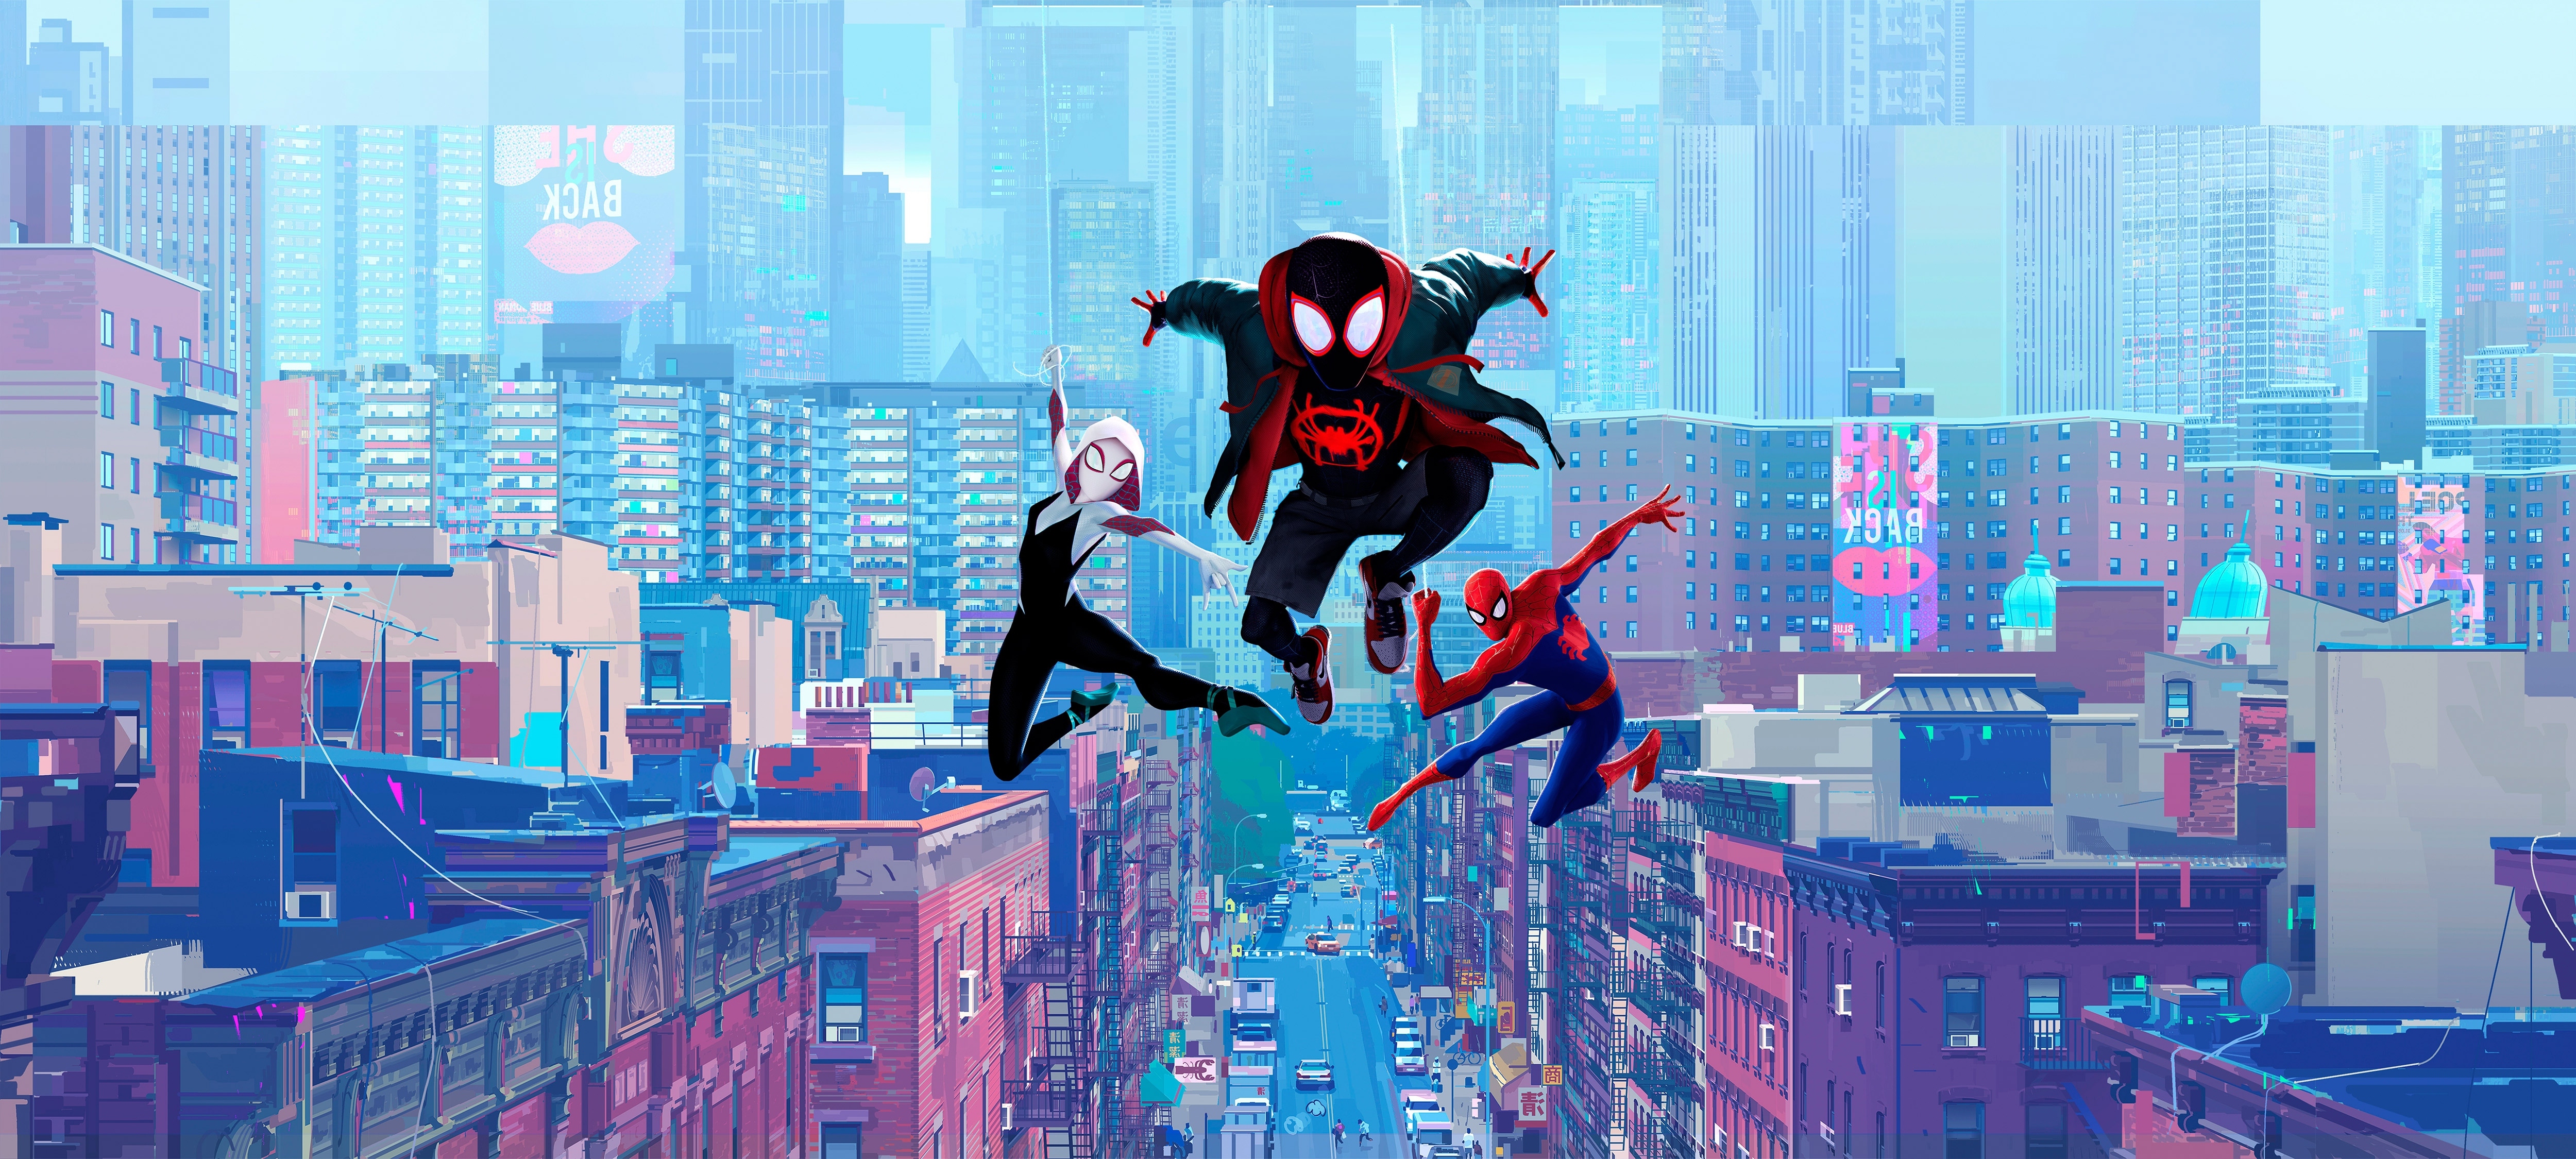 Wallpaper Spider Manː Into The Spider Verse, Buildings, Animation, Miles Morales, Gwen, Jumping:5000x2250